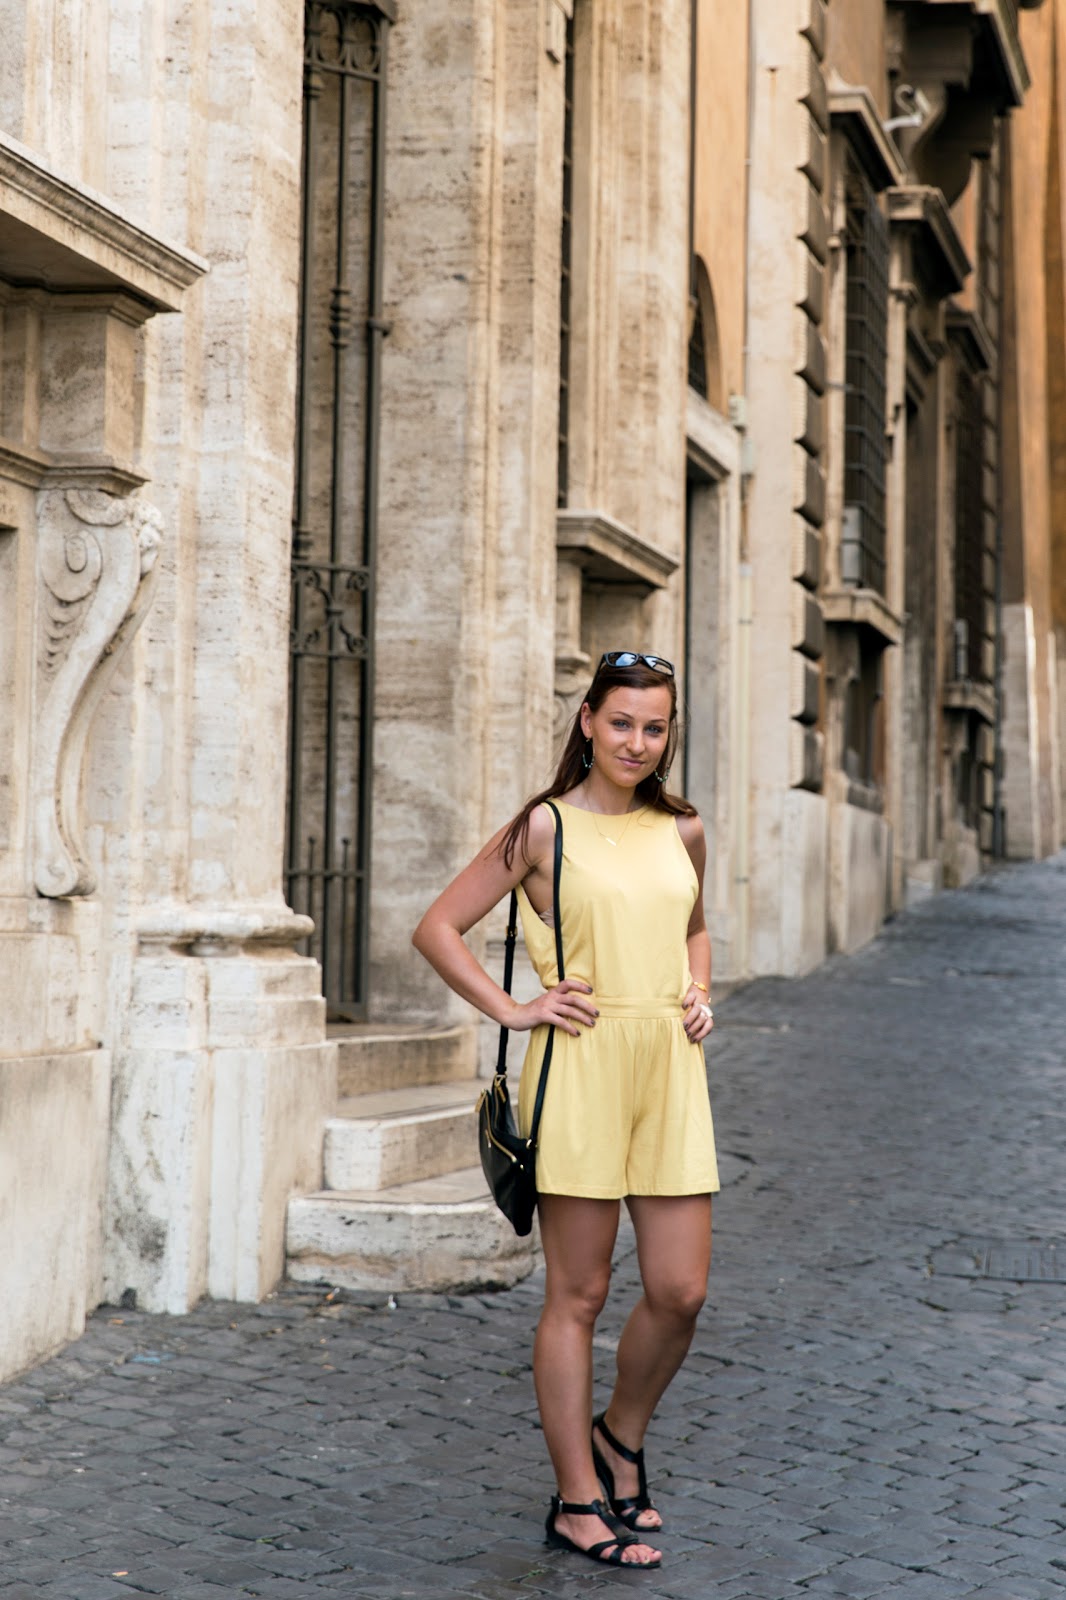 The World by The Brunette: How to Dress in Rome During Summer